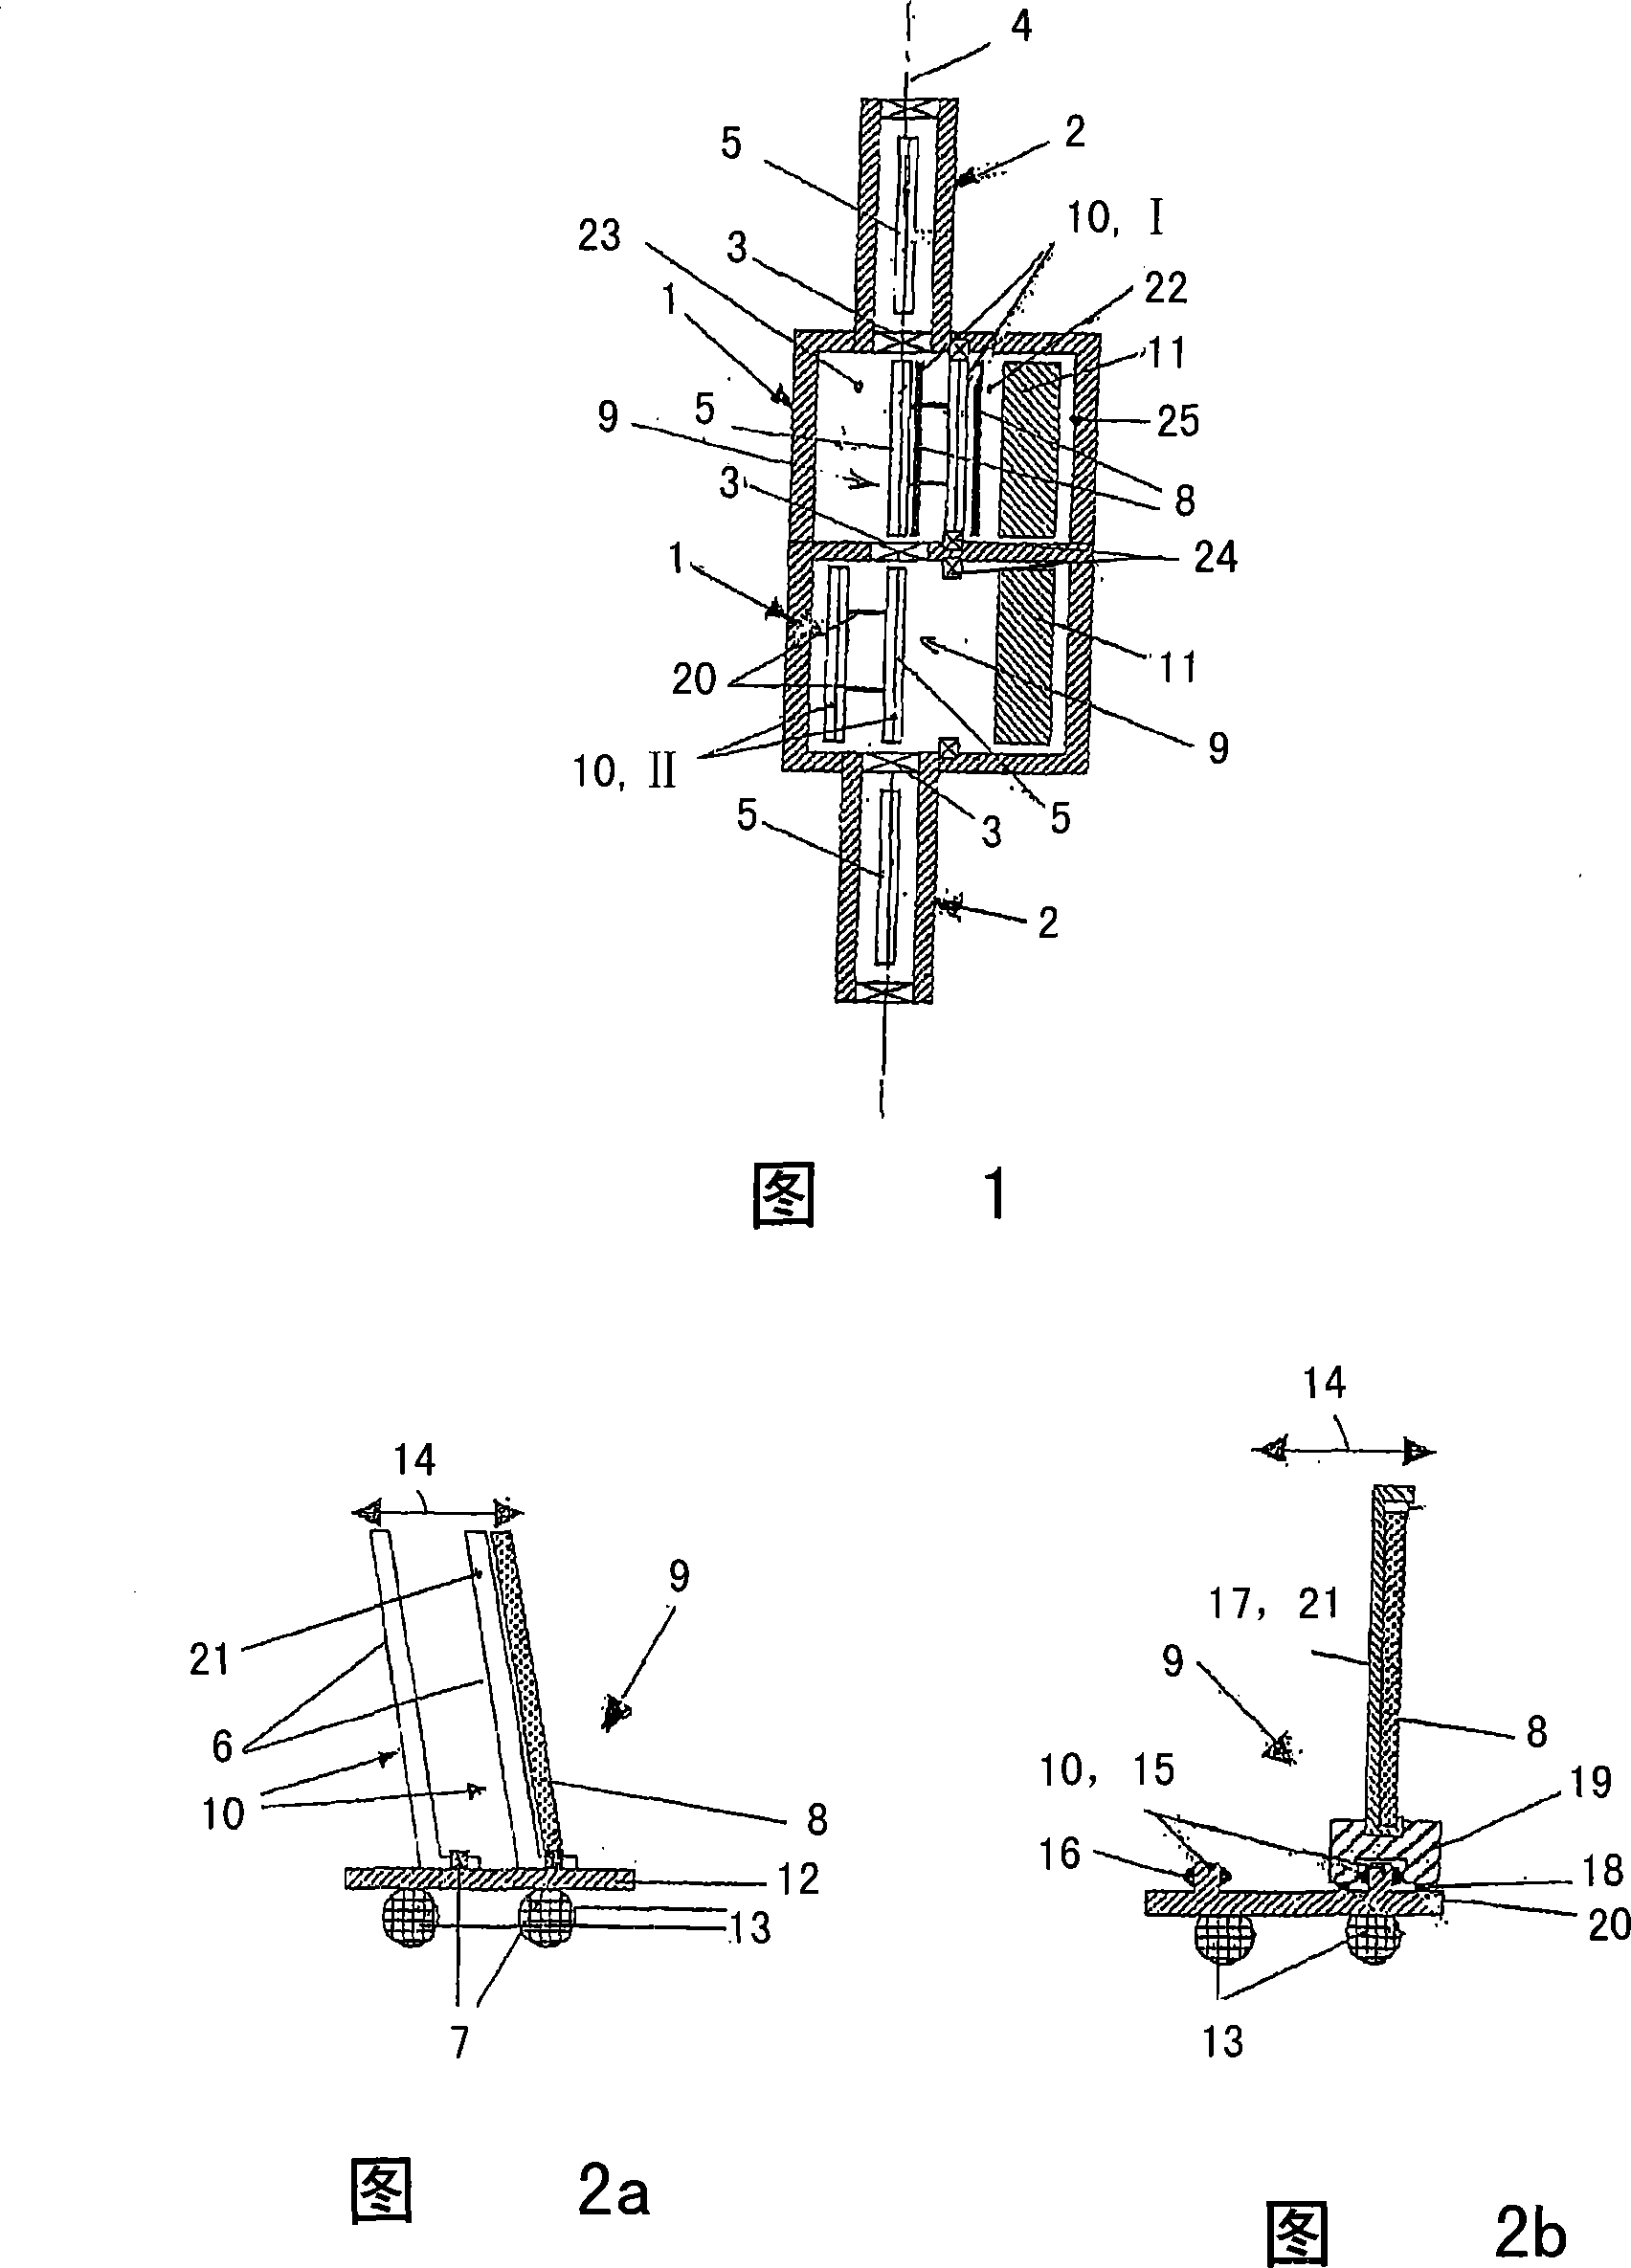 Transport device in a facility for processing substrates